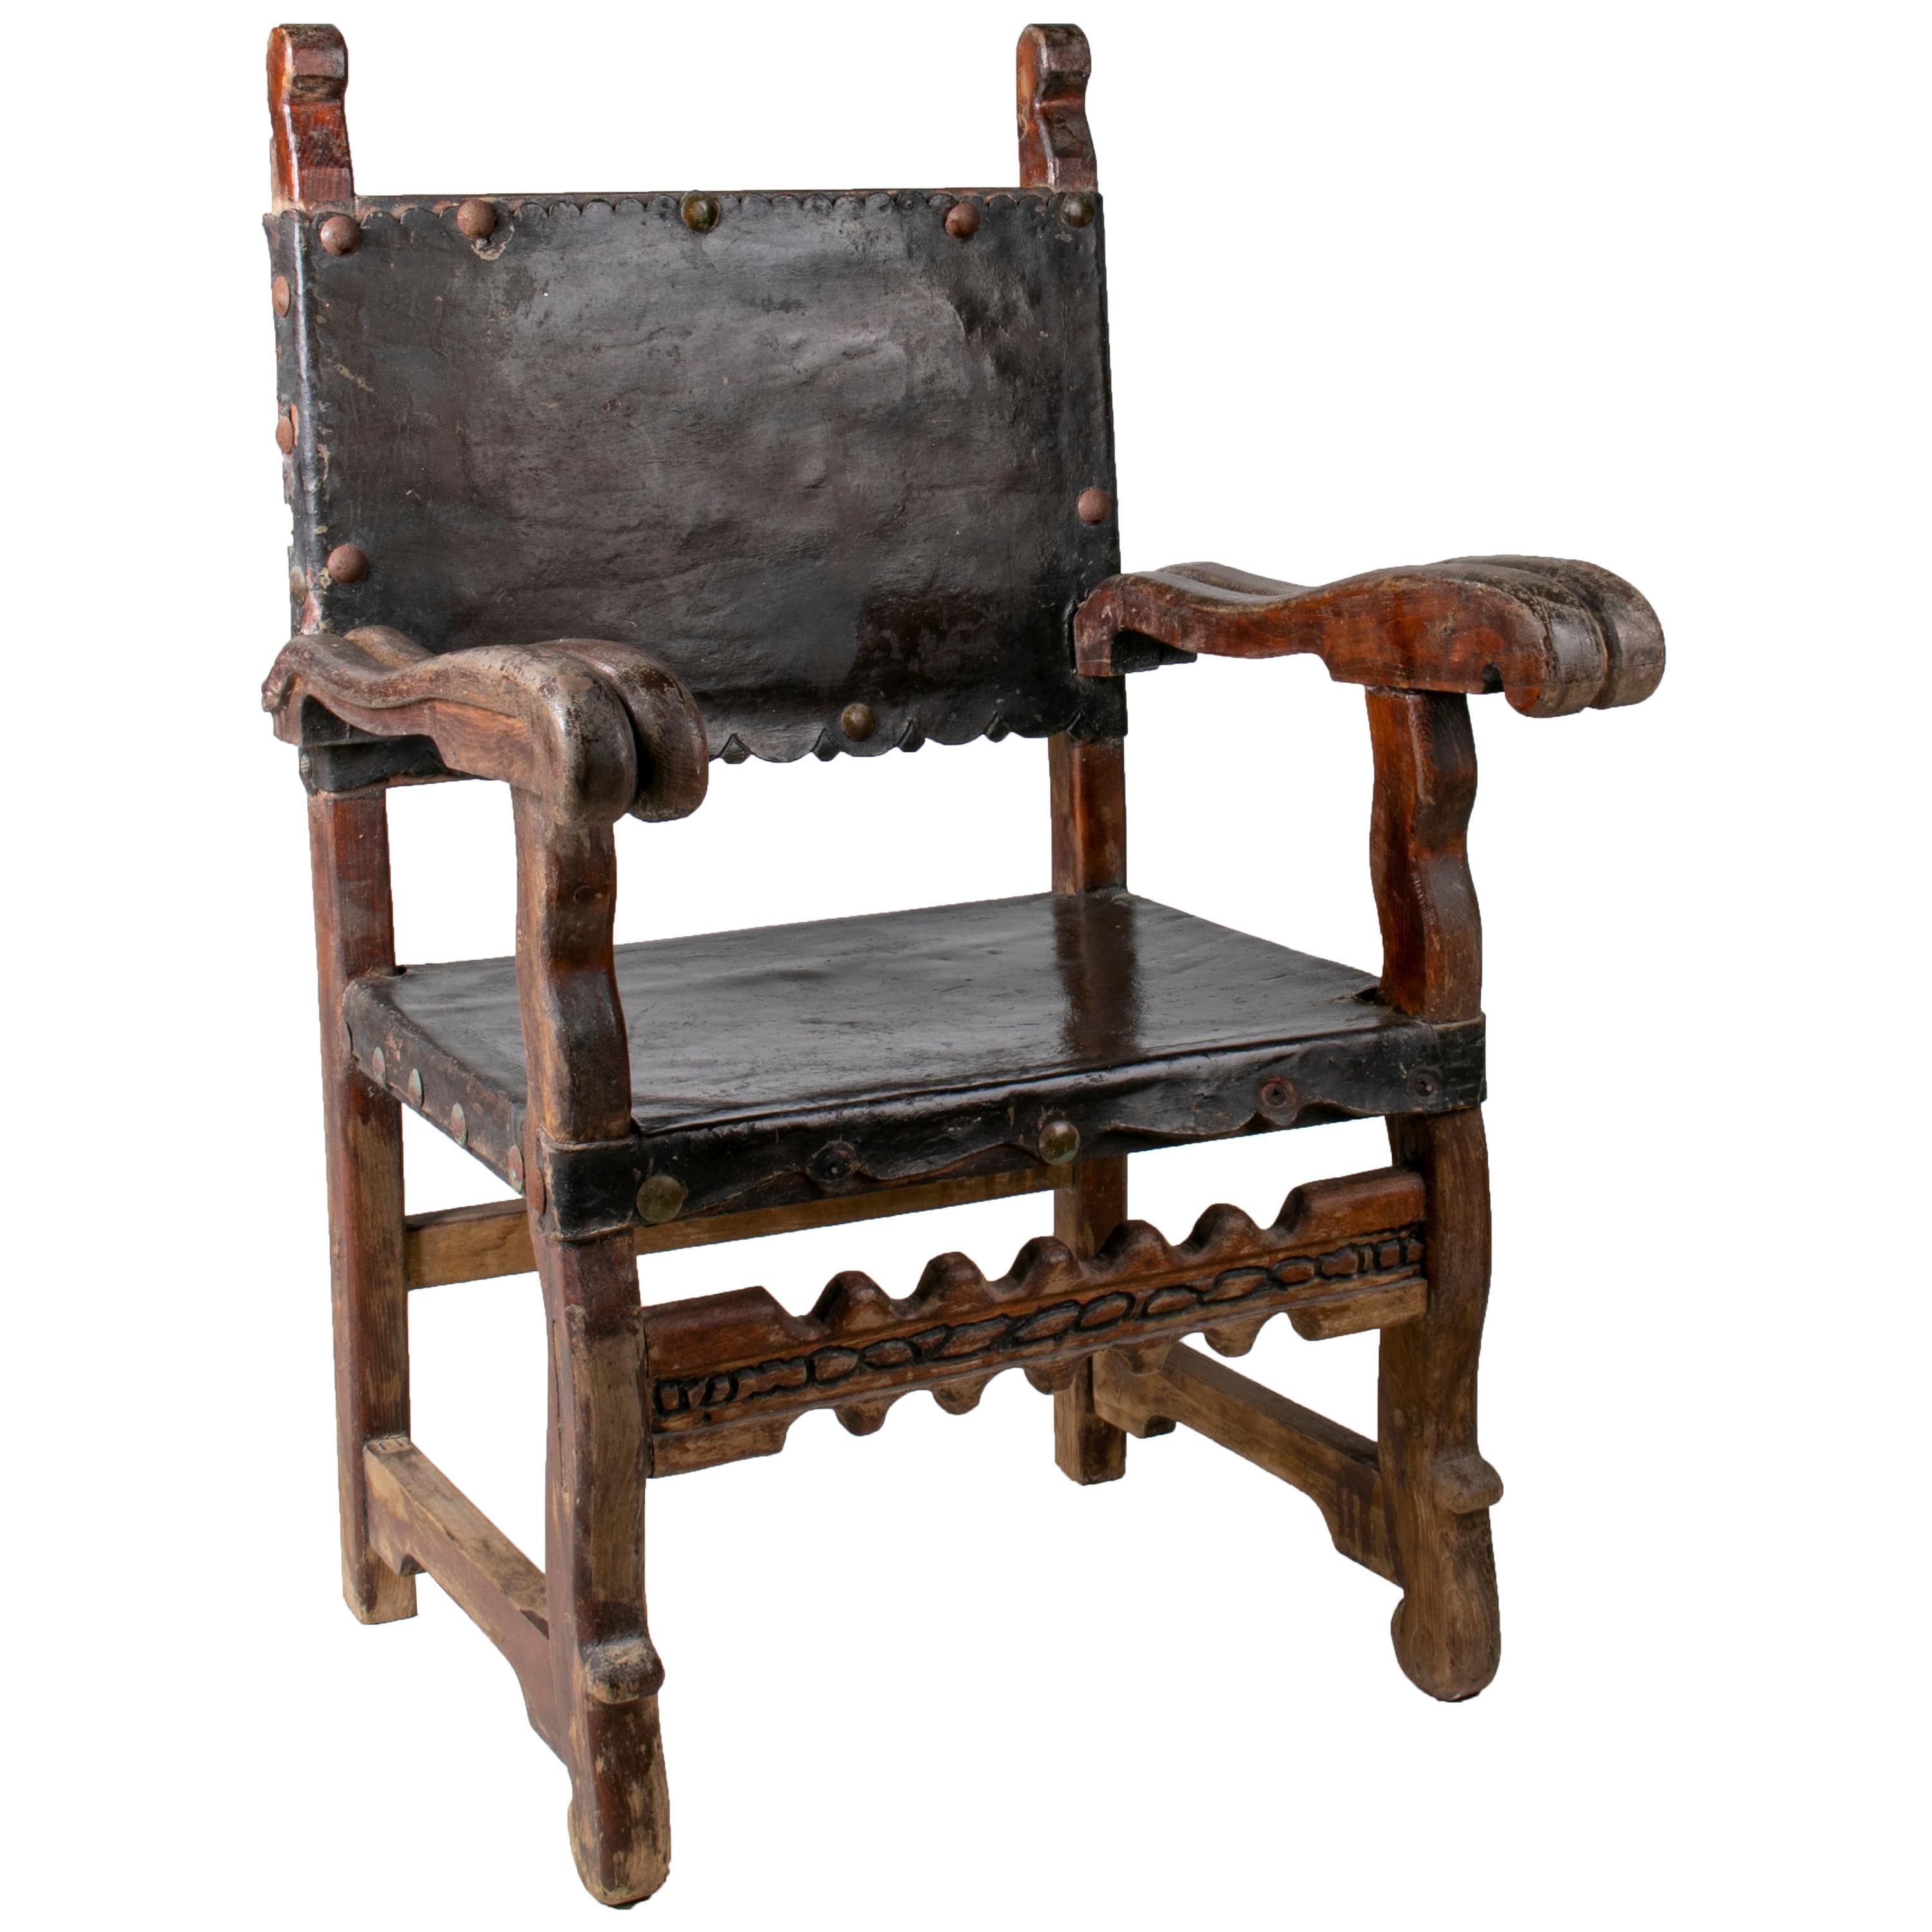 18th Century Peruvian "Frailero" Wooden Chair with Leather Seat and Back For Sale